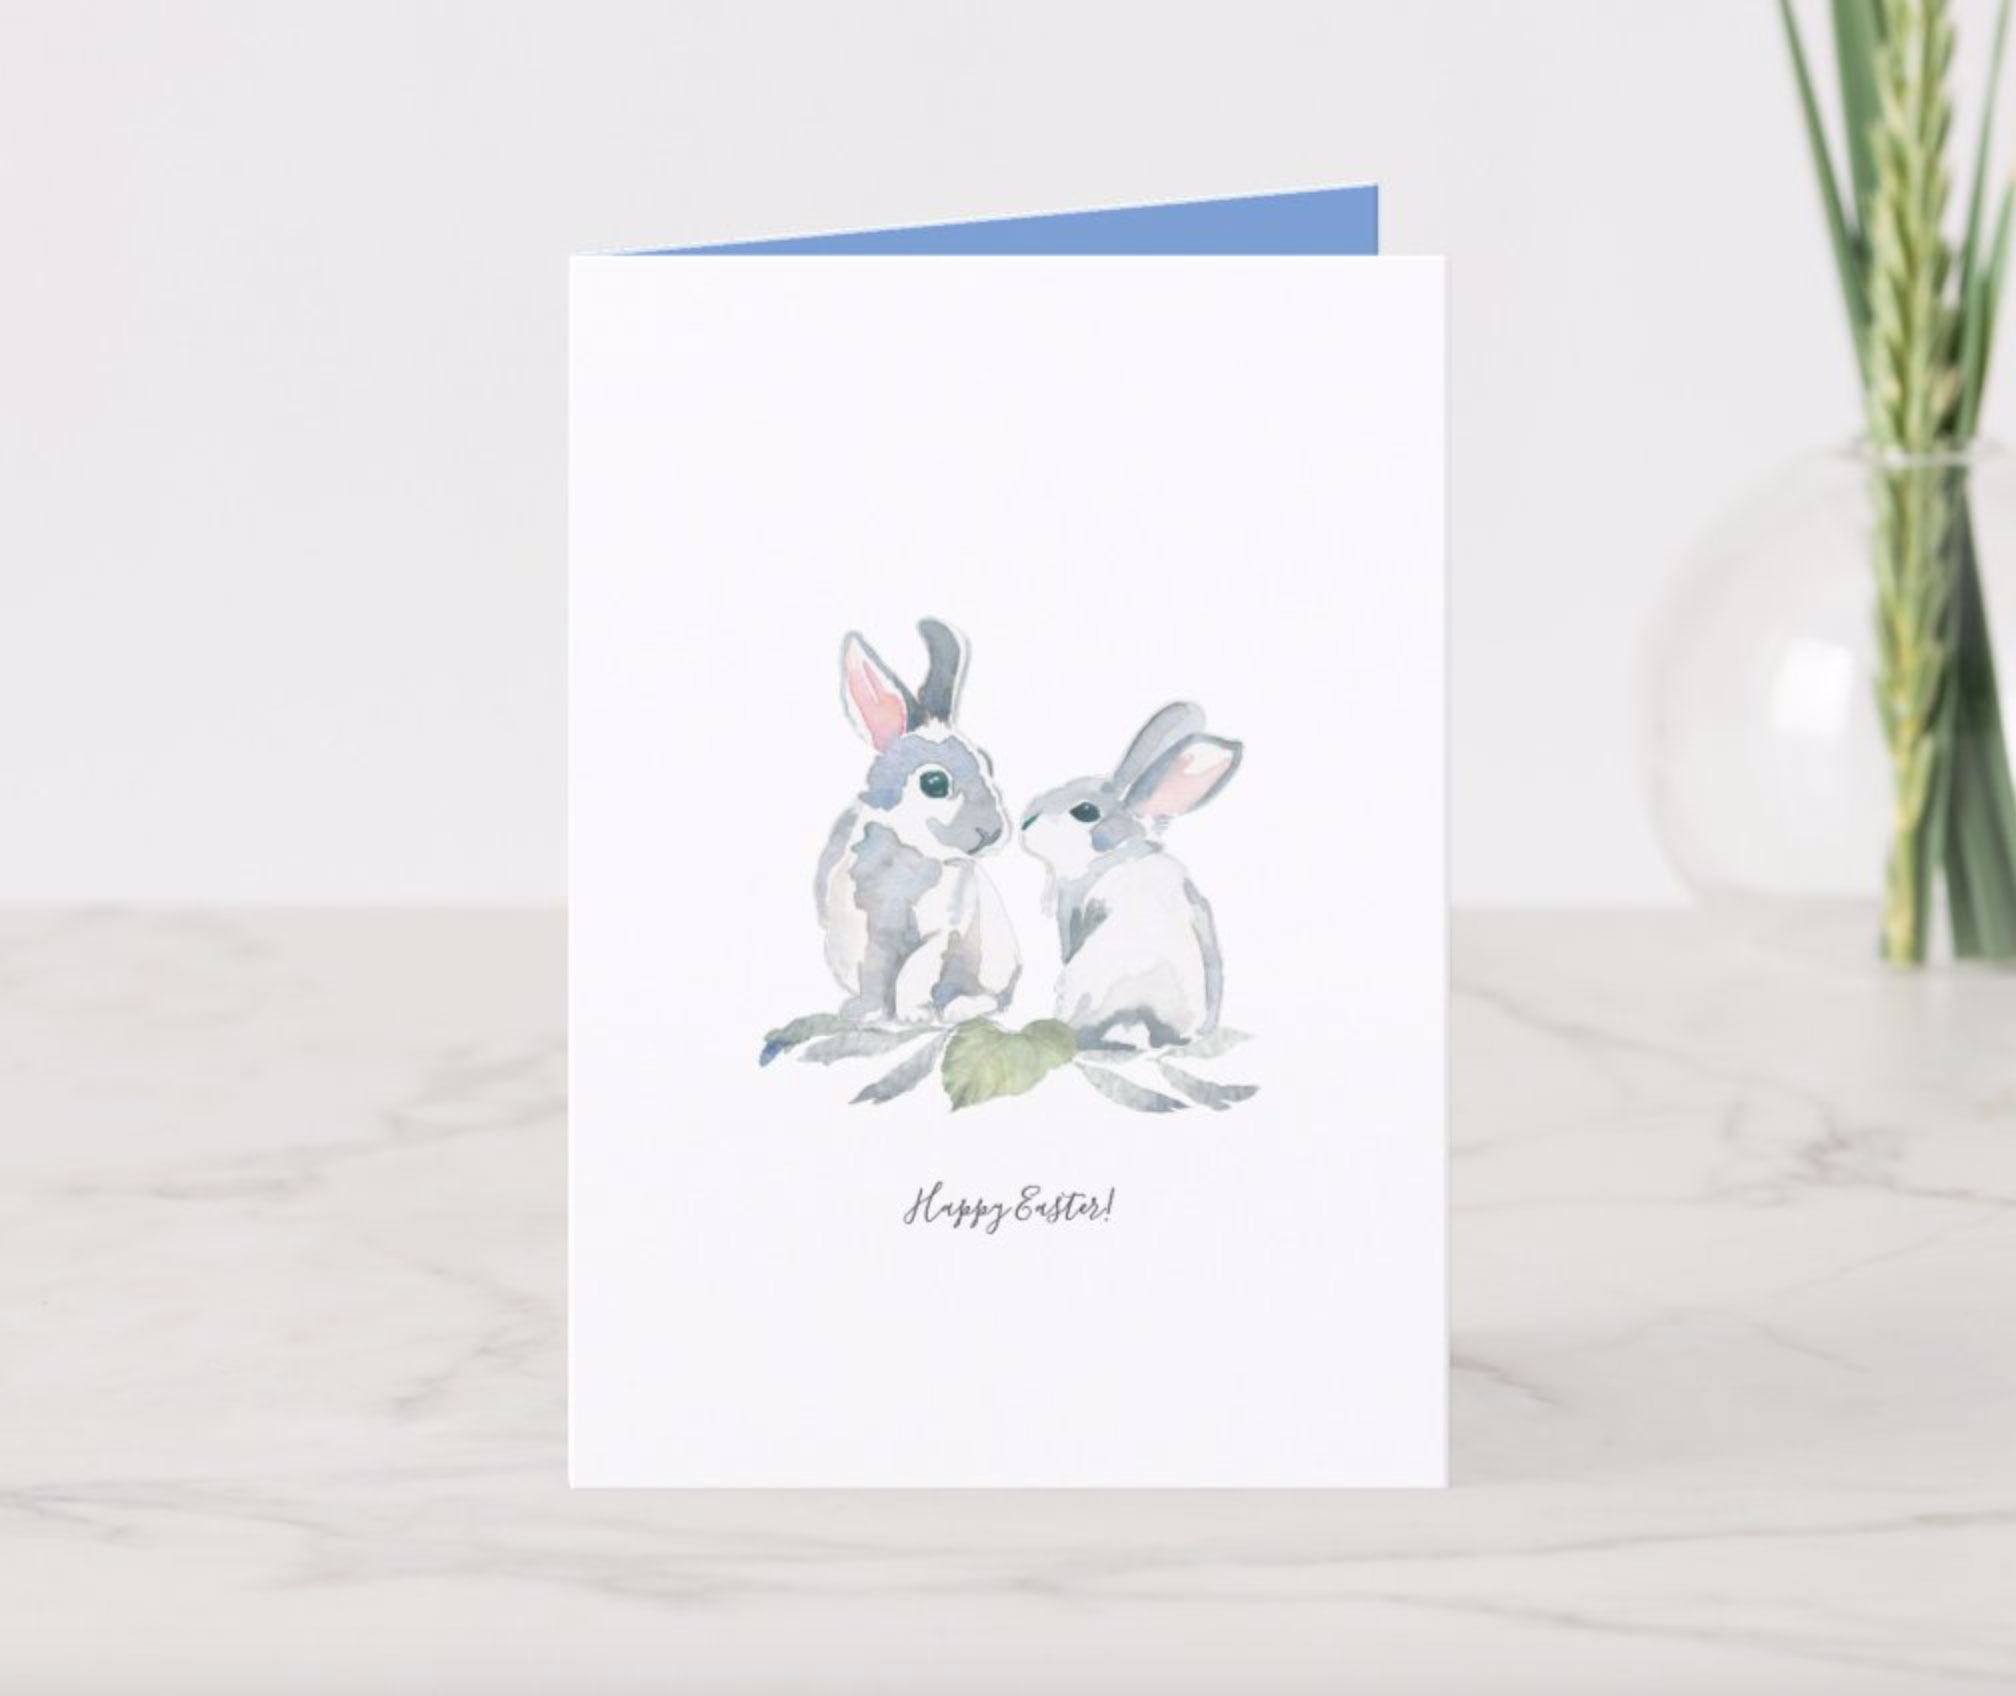 2 watercolor Easter bunnies on a plain white background. 